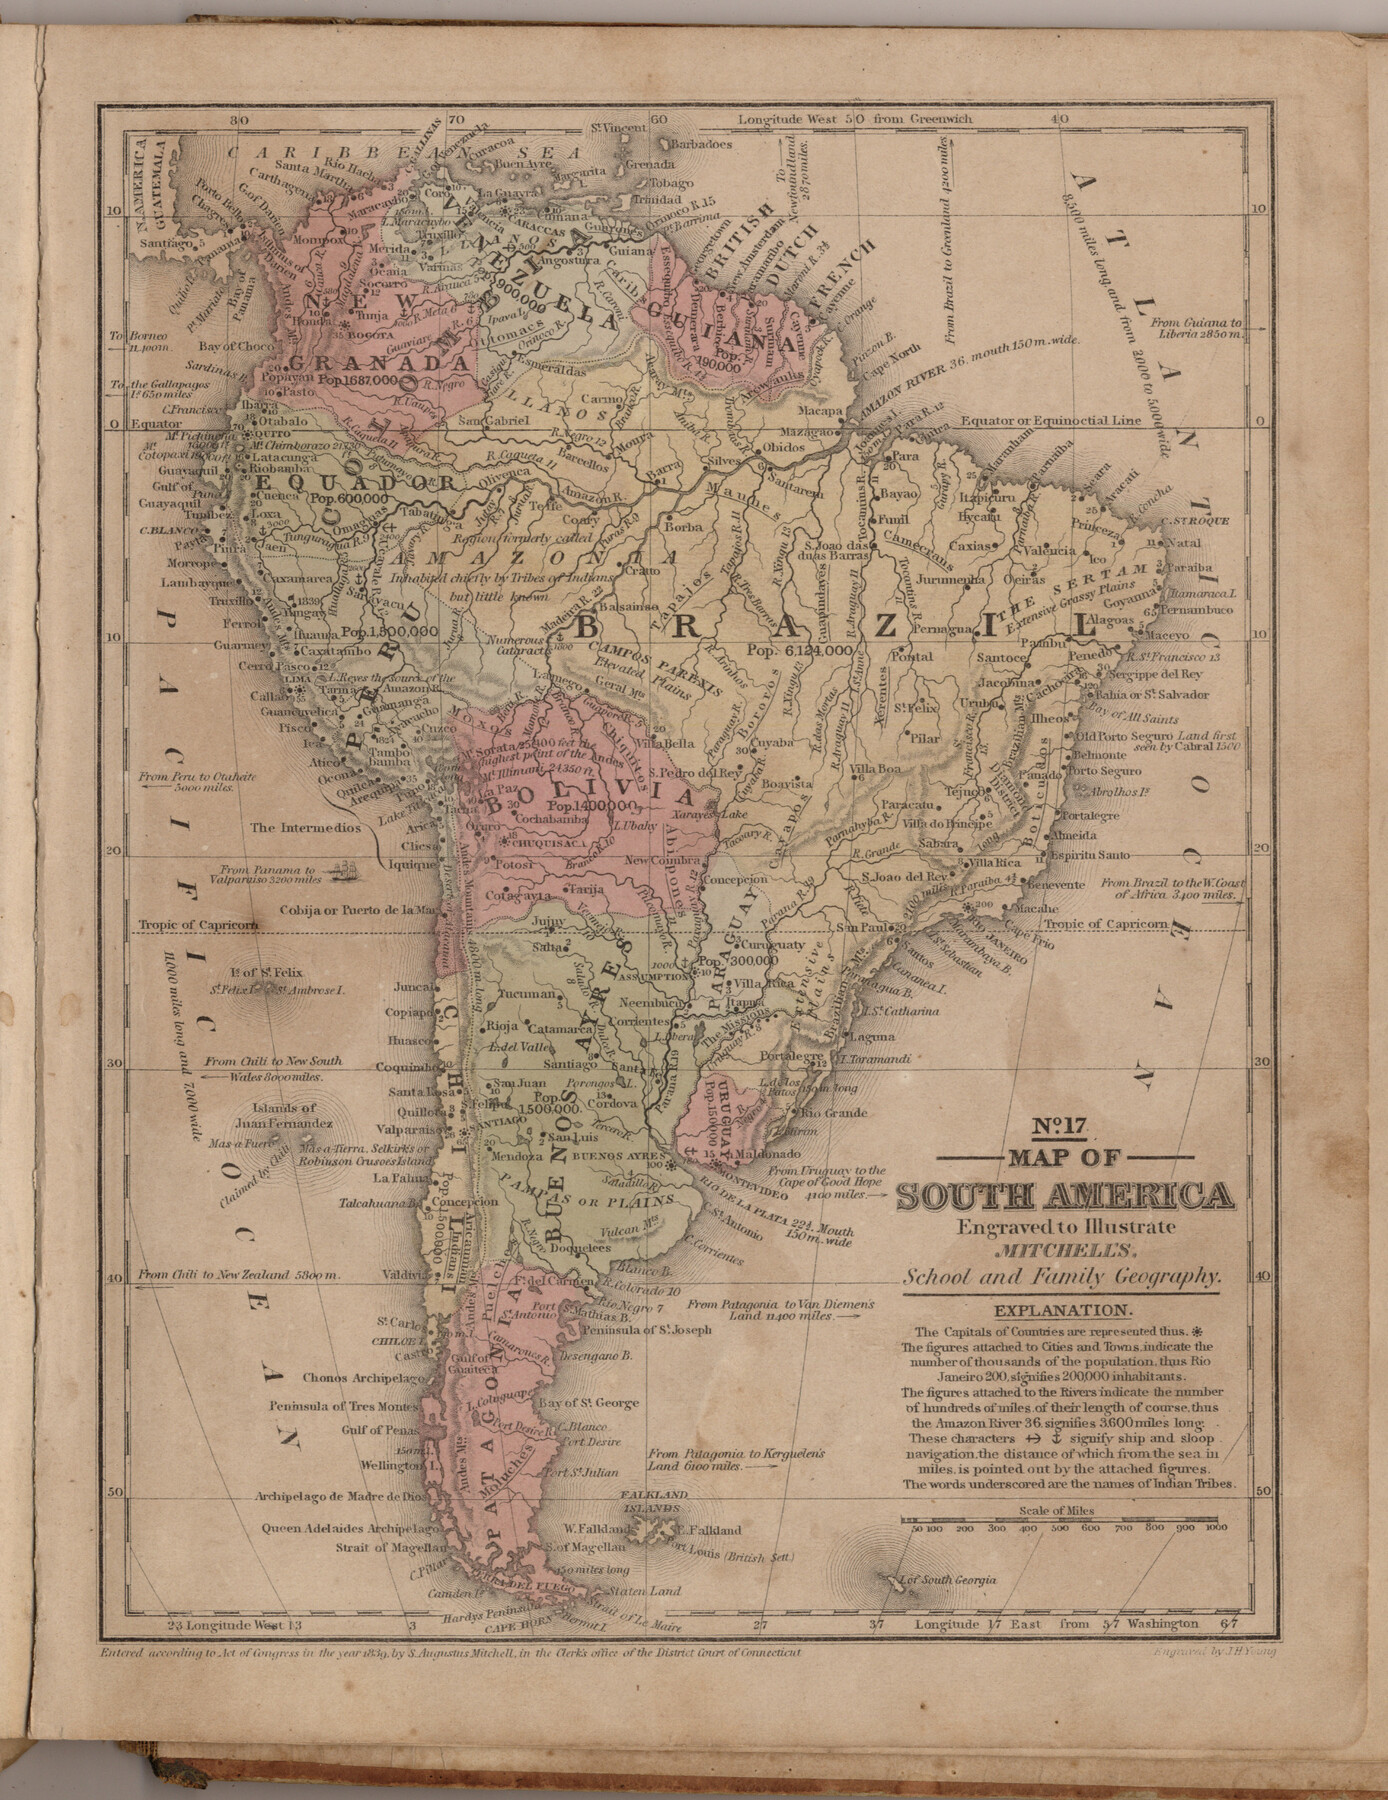 93501, Map of South America engraved to illustrate Mitchell's school and family geography, General Map Collection